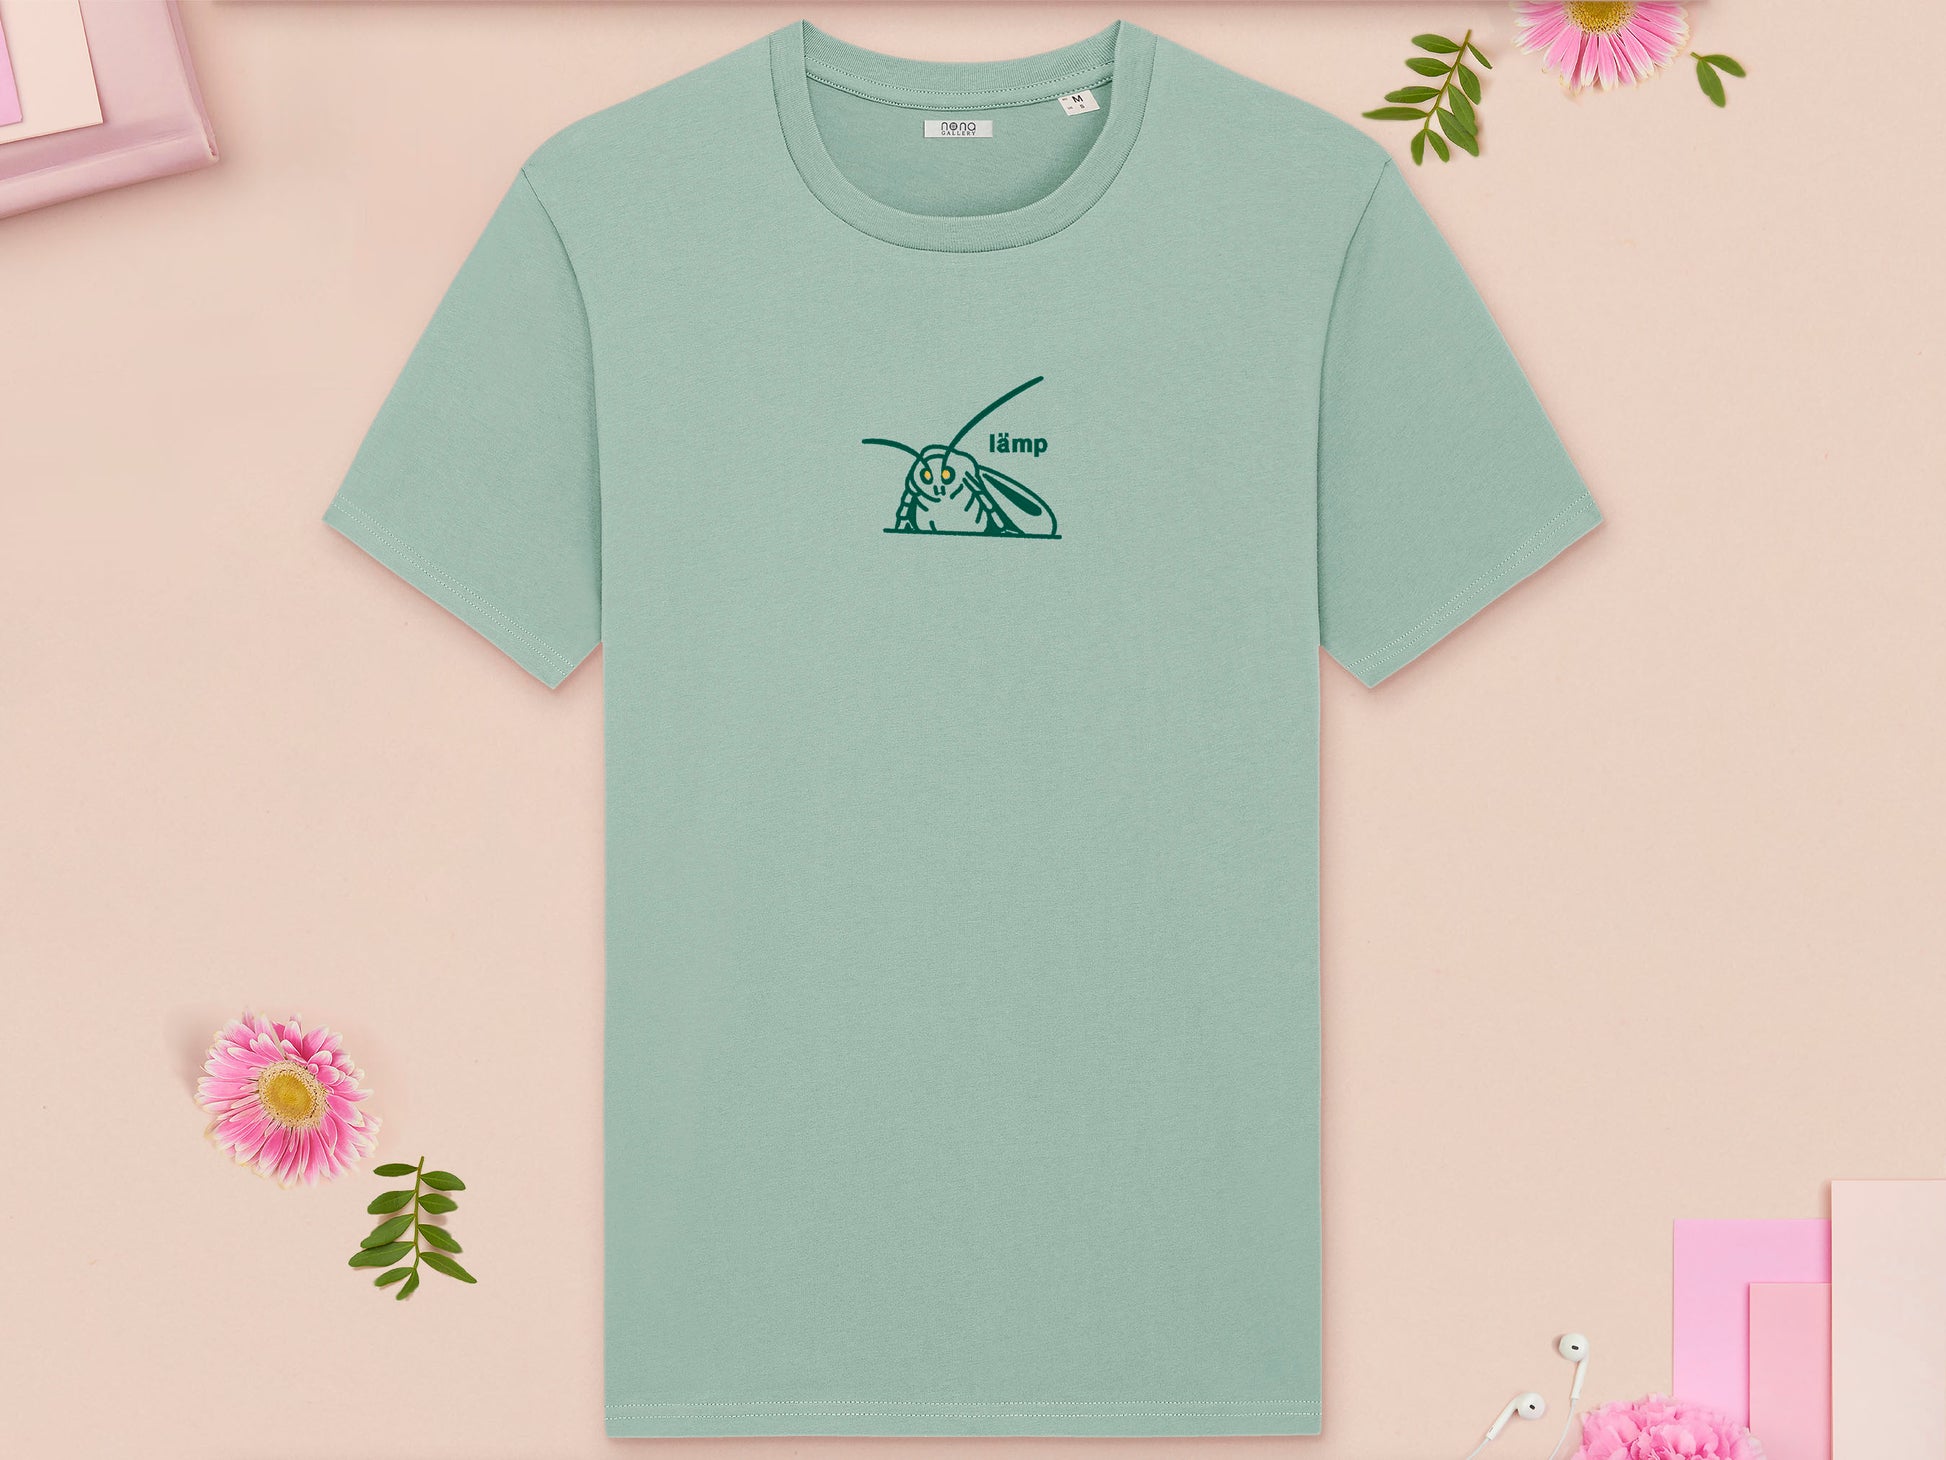 A green crew neck short sleeve t-shirt, with an embroidered green  thread design of a moth with glowing yellow eyes and the word lämp